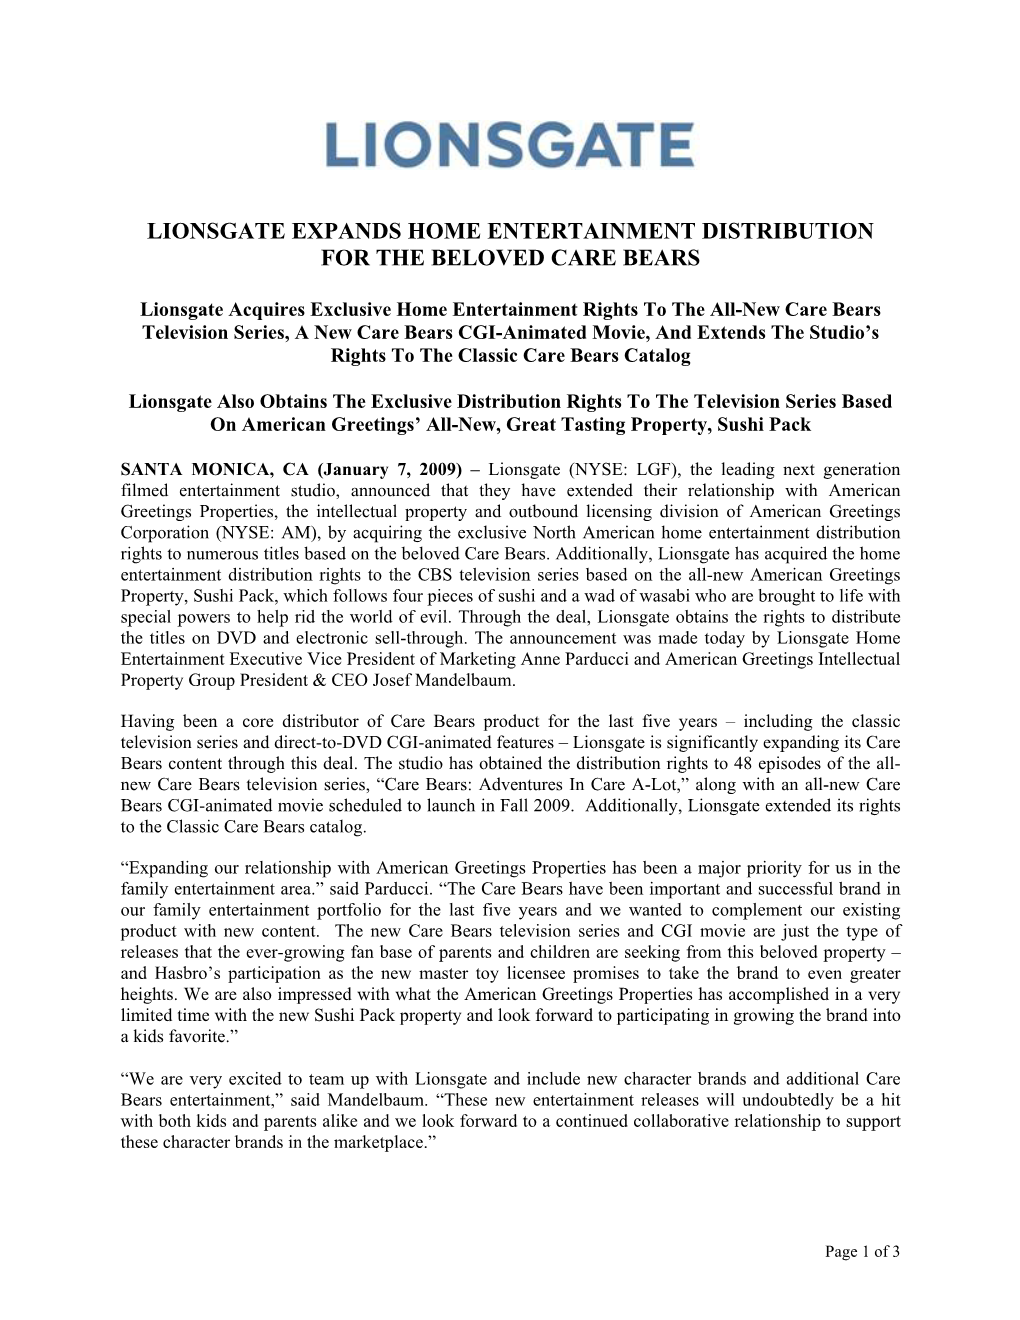 Lionsgate Expands Home Entertainment Distribution for the Beloved Care Bears